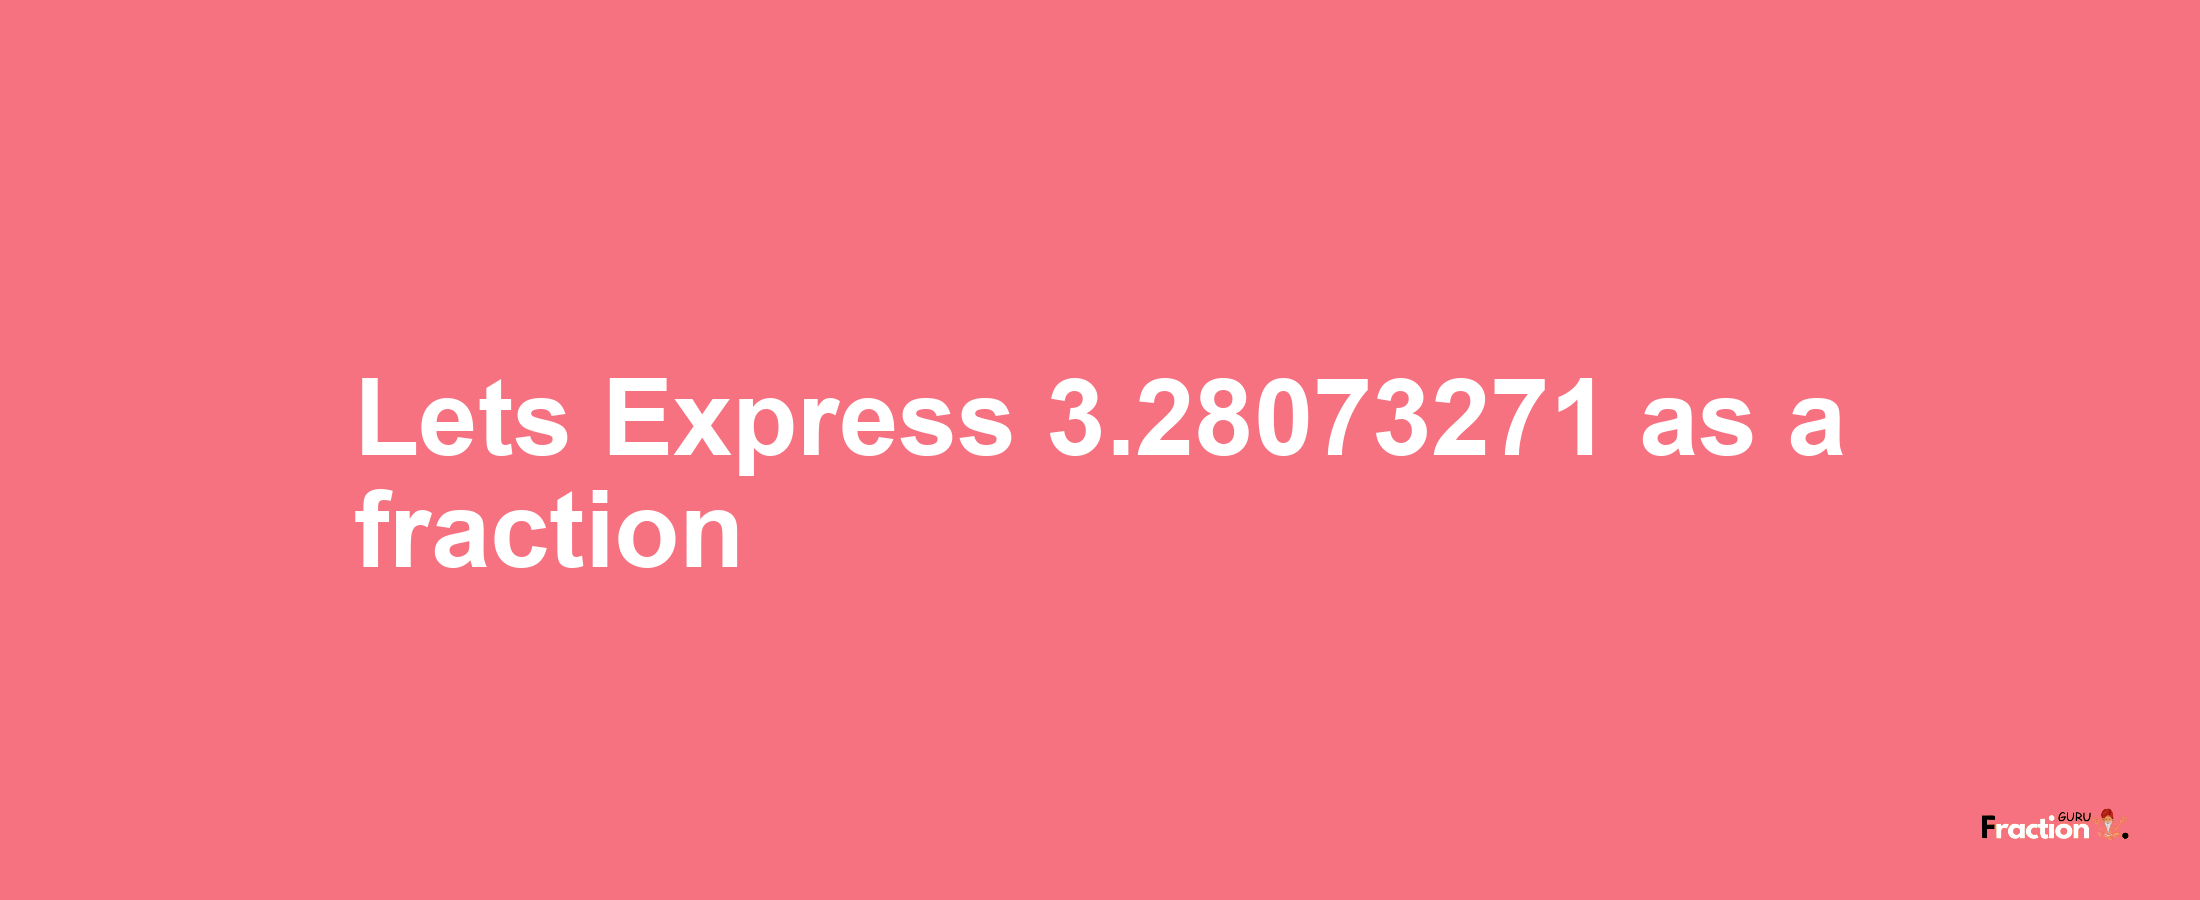 Lets Express 3.28073271 as afraction